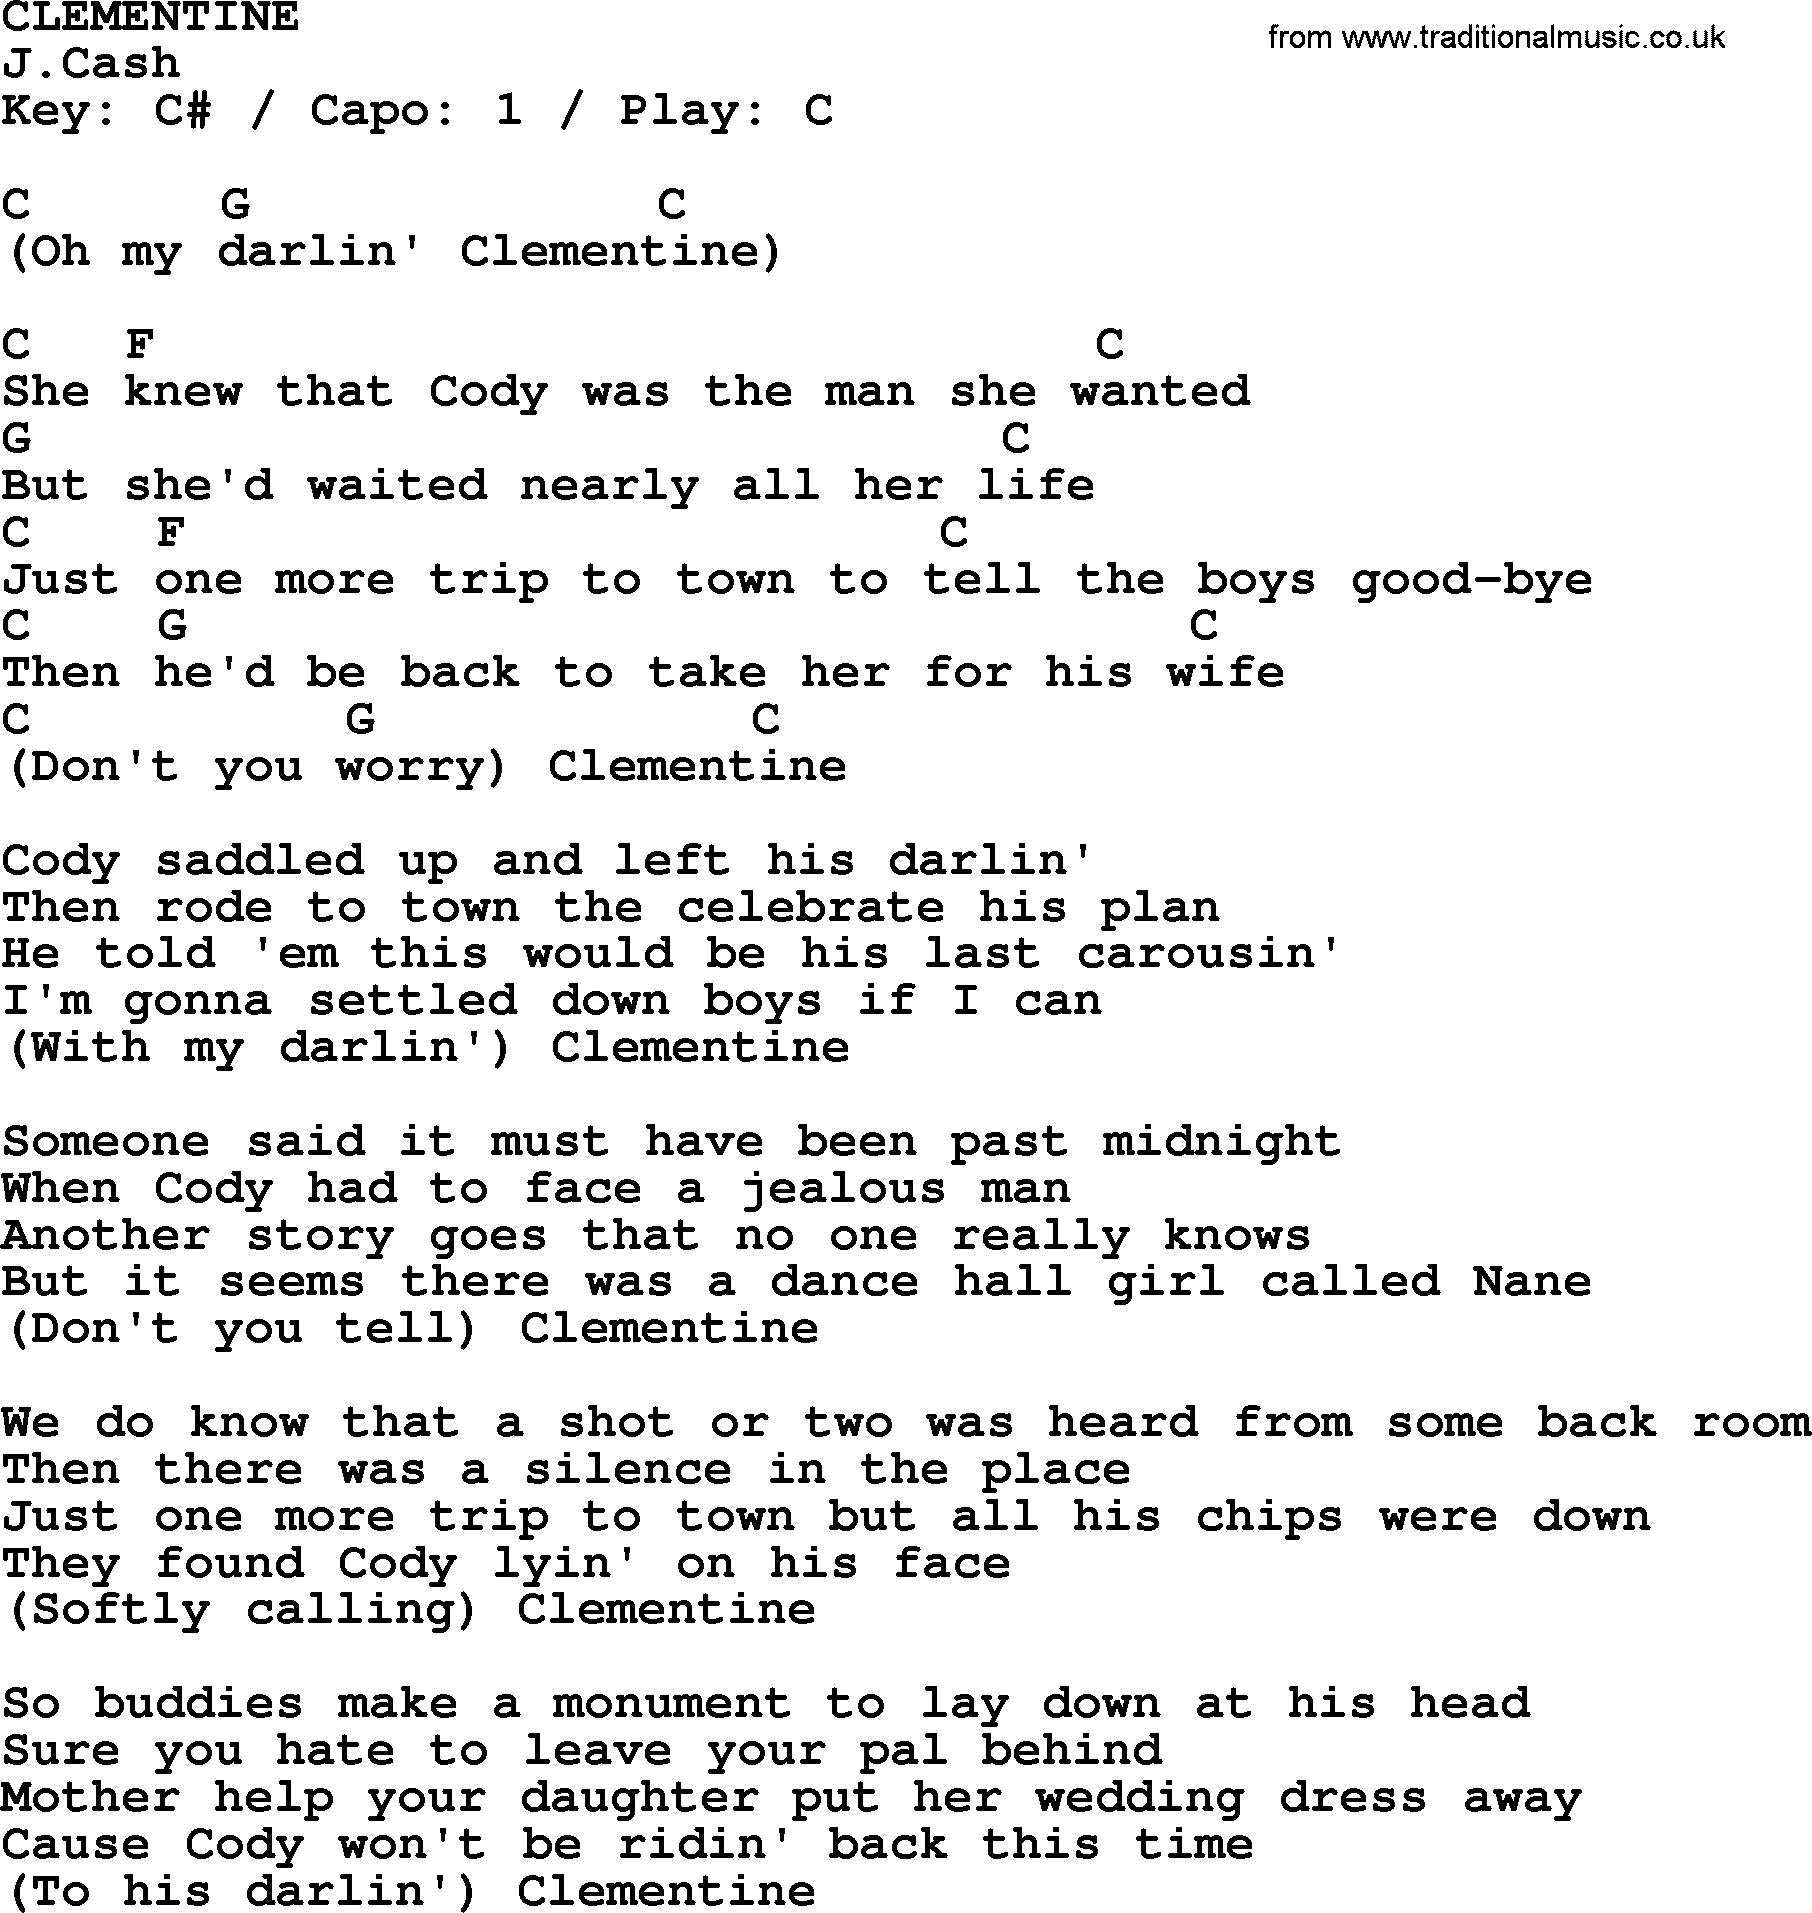 Johnny Cash song Clementine, lyrics and chords